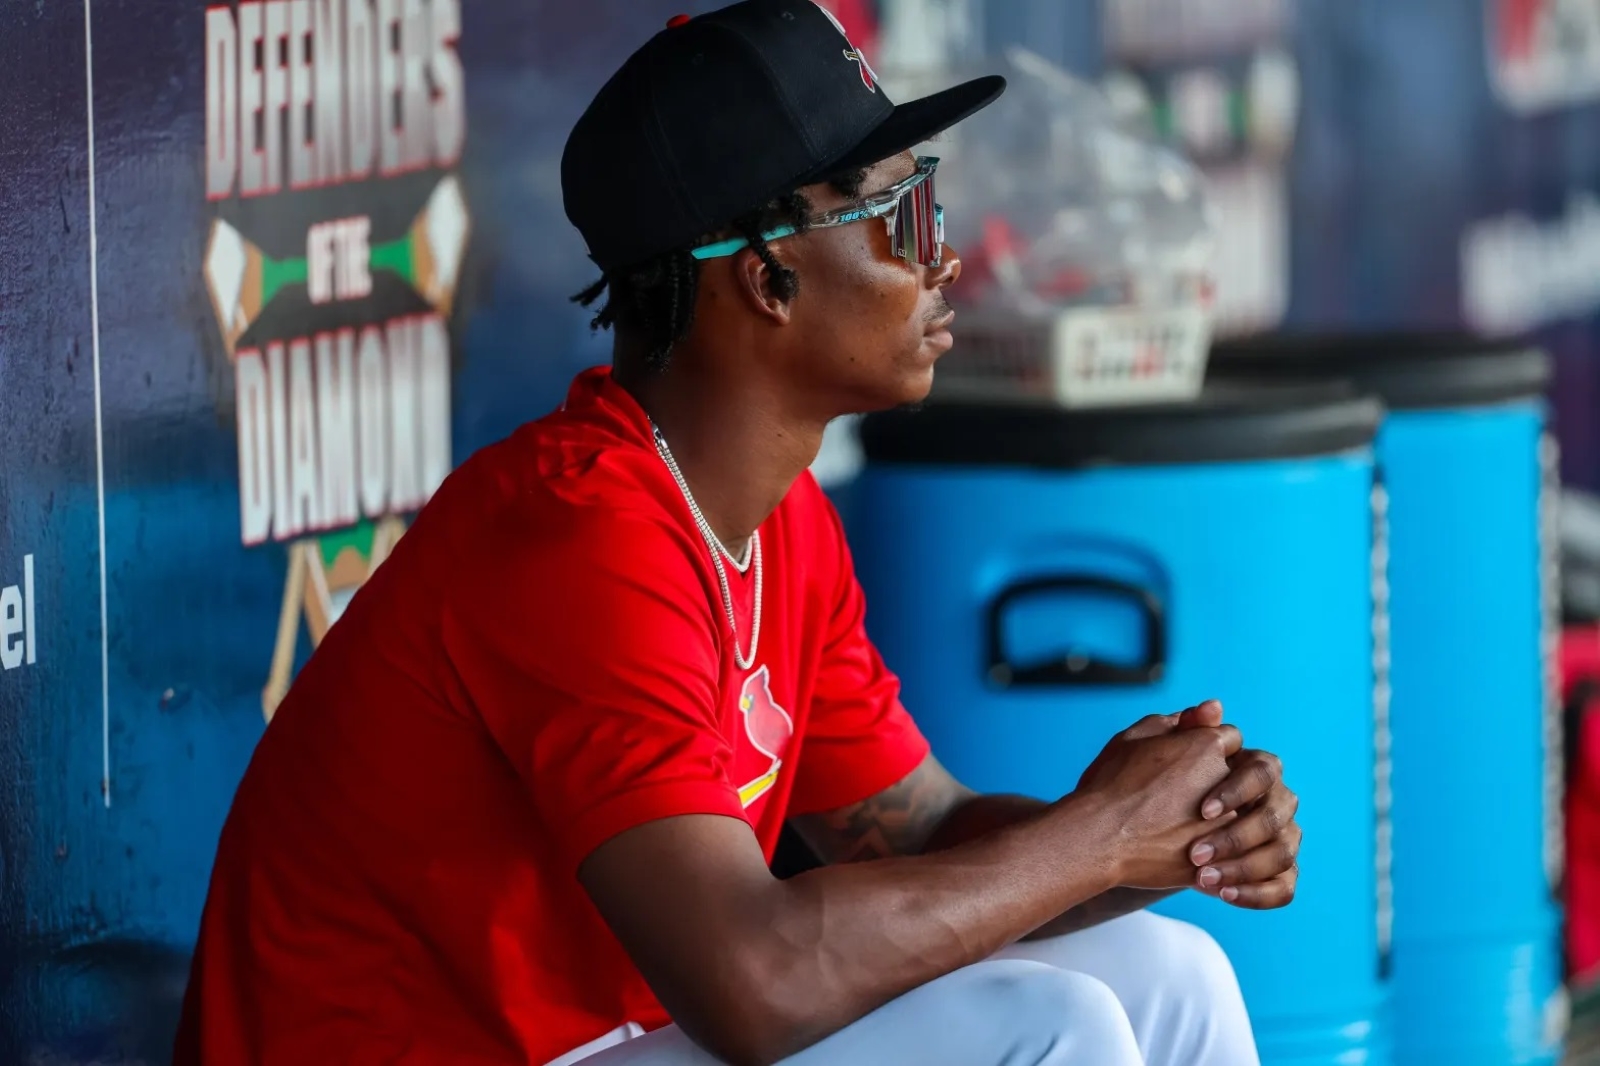 Tink Hence, wearing a Springfield Cardinals uniform, sits in the dugout at Hammons Field in Springfield, Missouri.